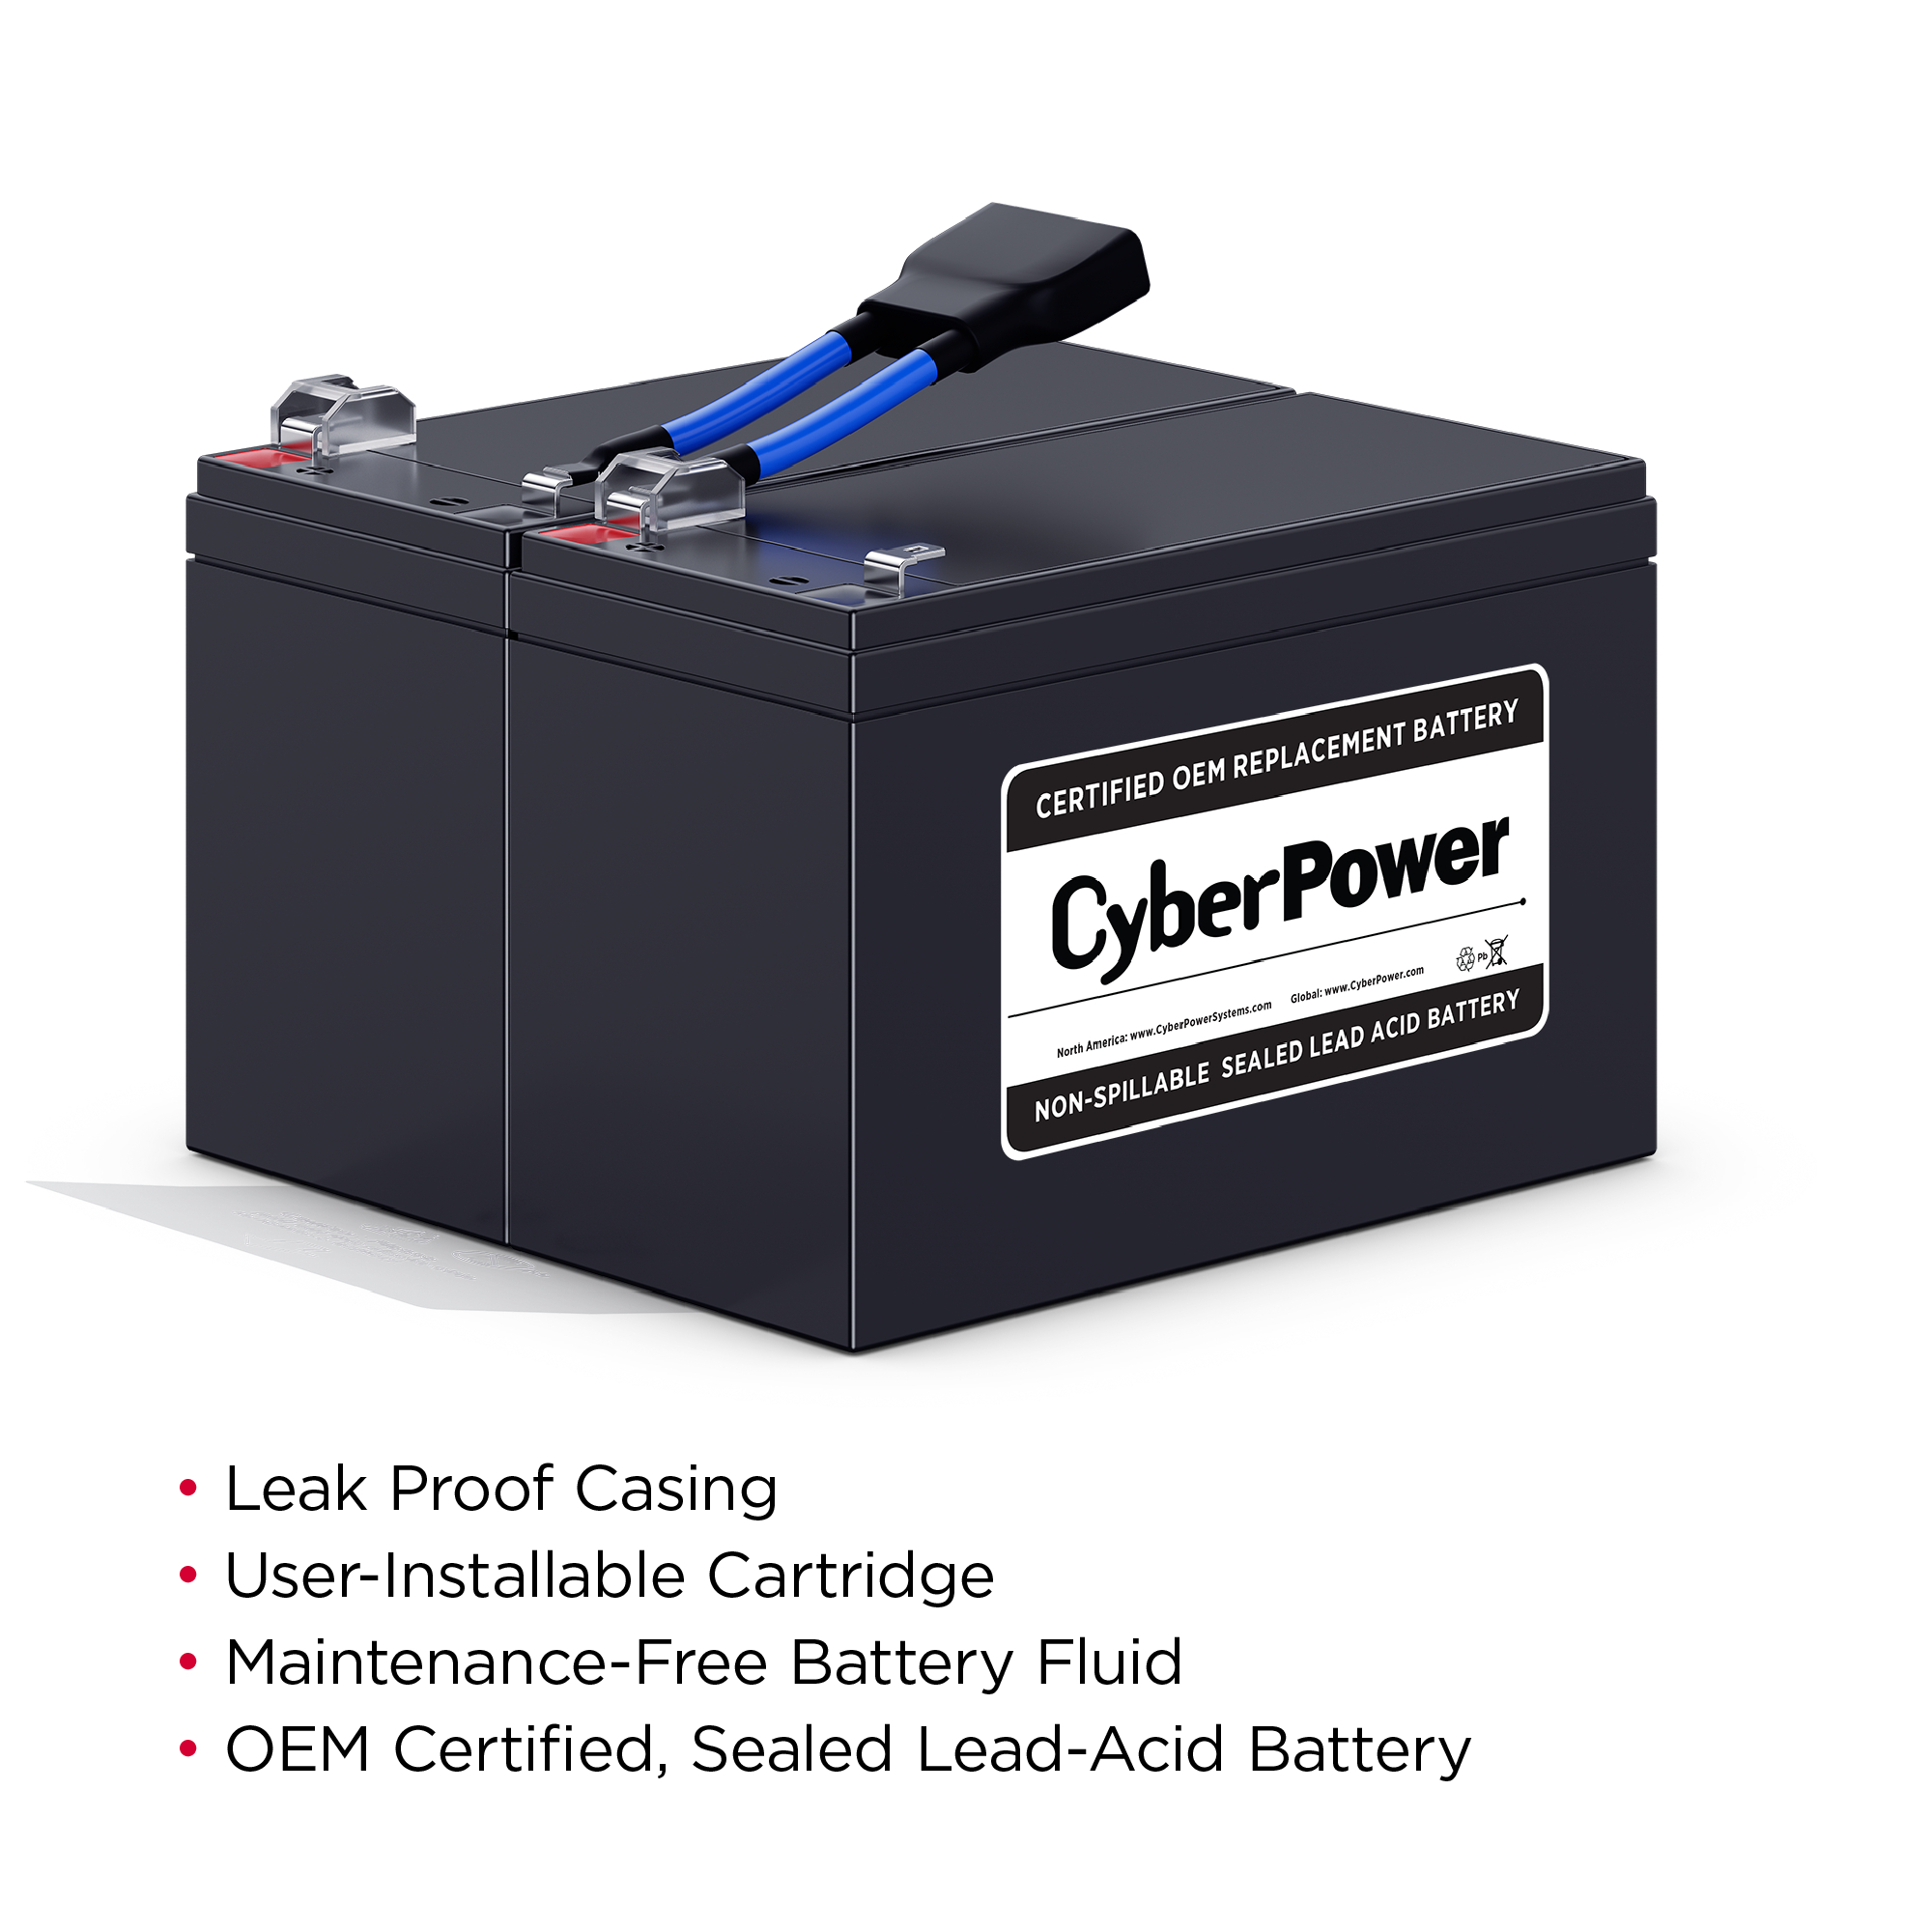 Battery products